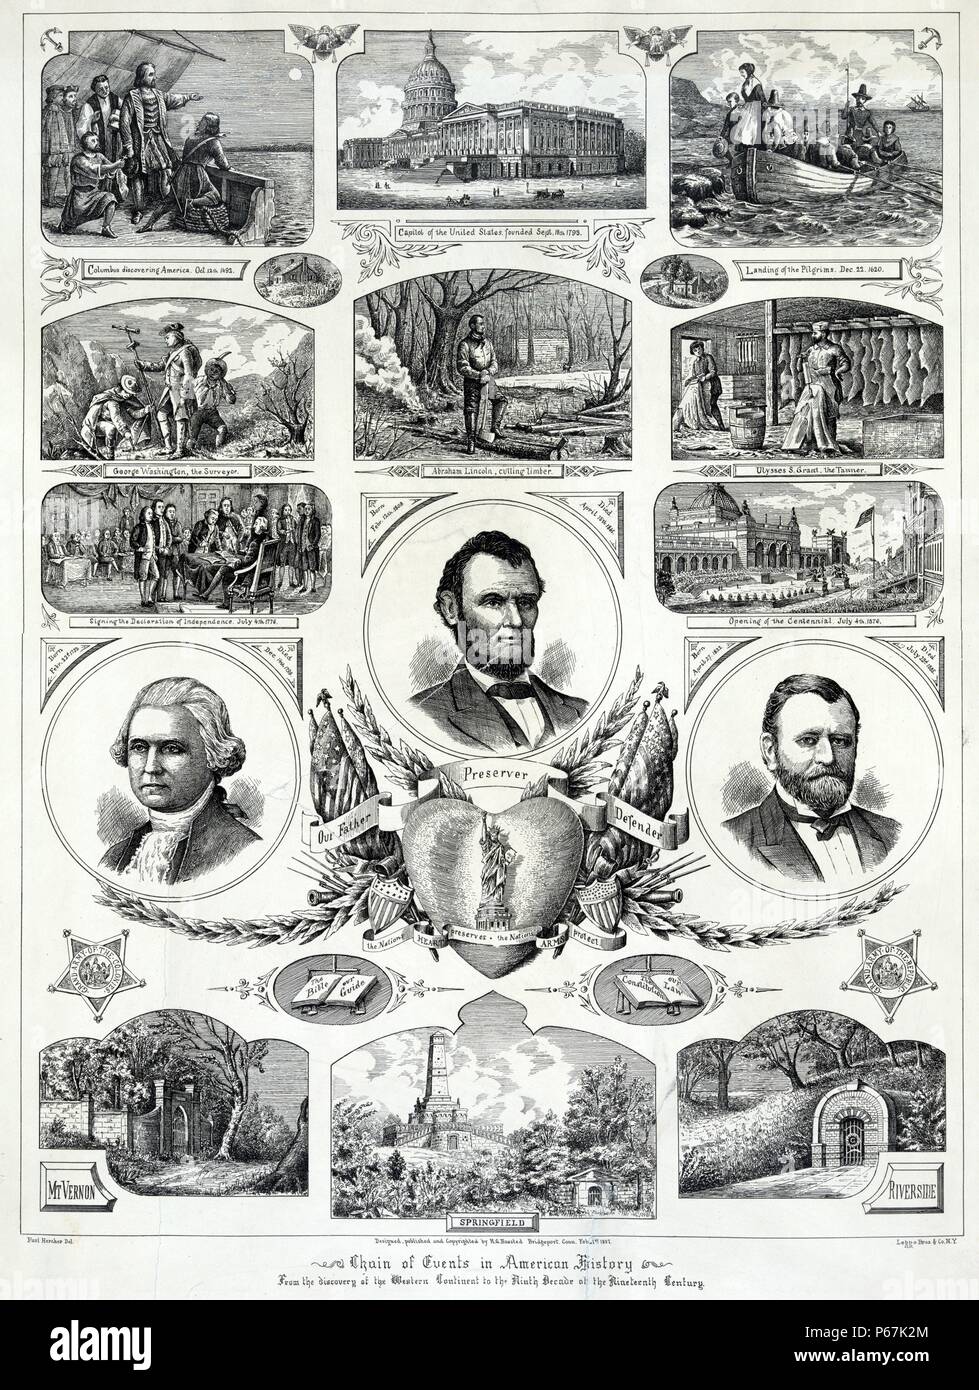 Chain of events in American history - from the discovery of the western continent to the ninth decade of the nineteenth century' Scenes of American history from the landing of Columbus to the 1876 Centennial with portraits of presidents Washington, Lincoln, and Grant, along with their tombs. Stock Photo